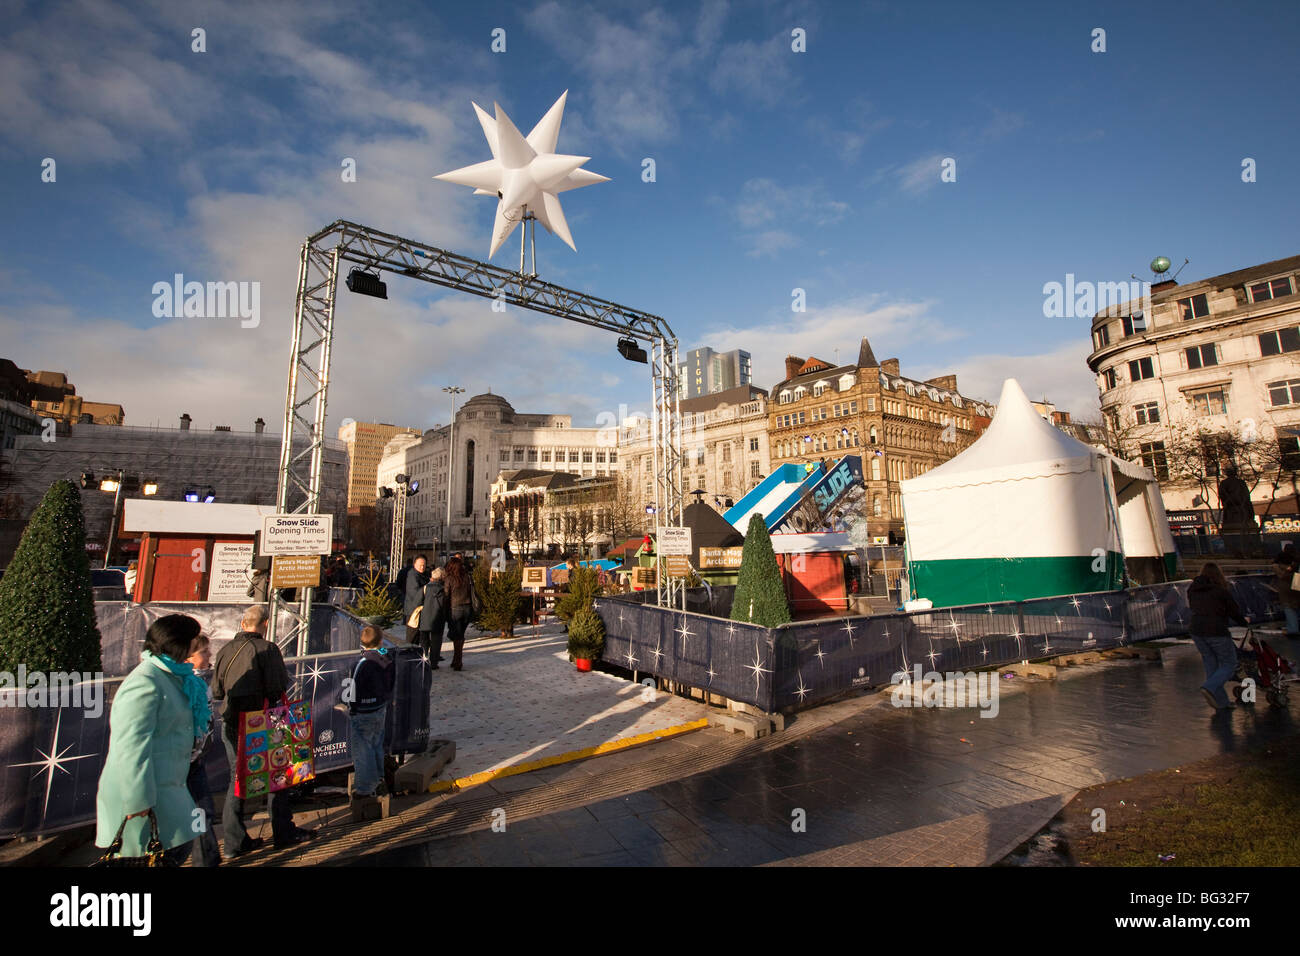 UK, England, Manchester, Piccadilly, Snow Gardens, Christmas event Stock Photo